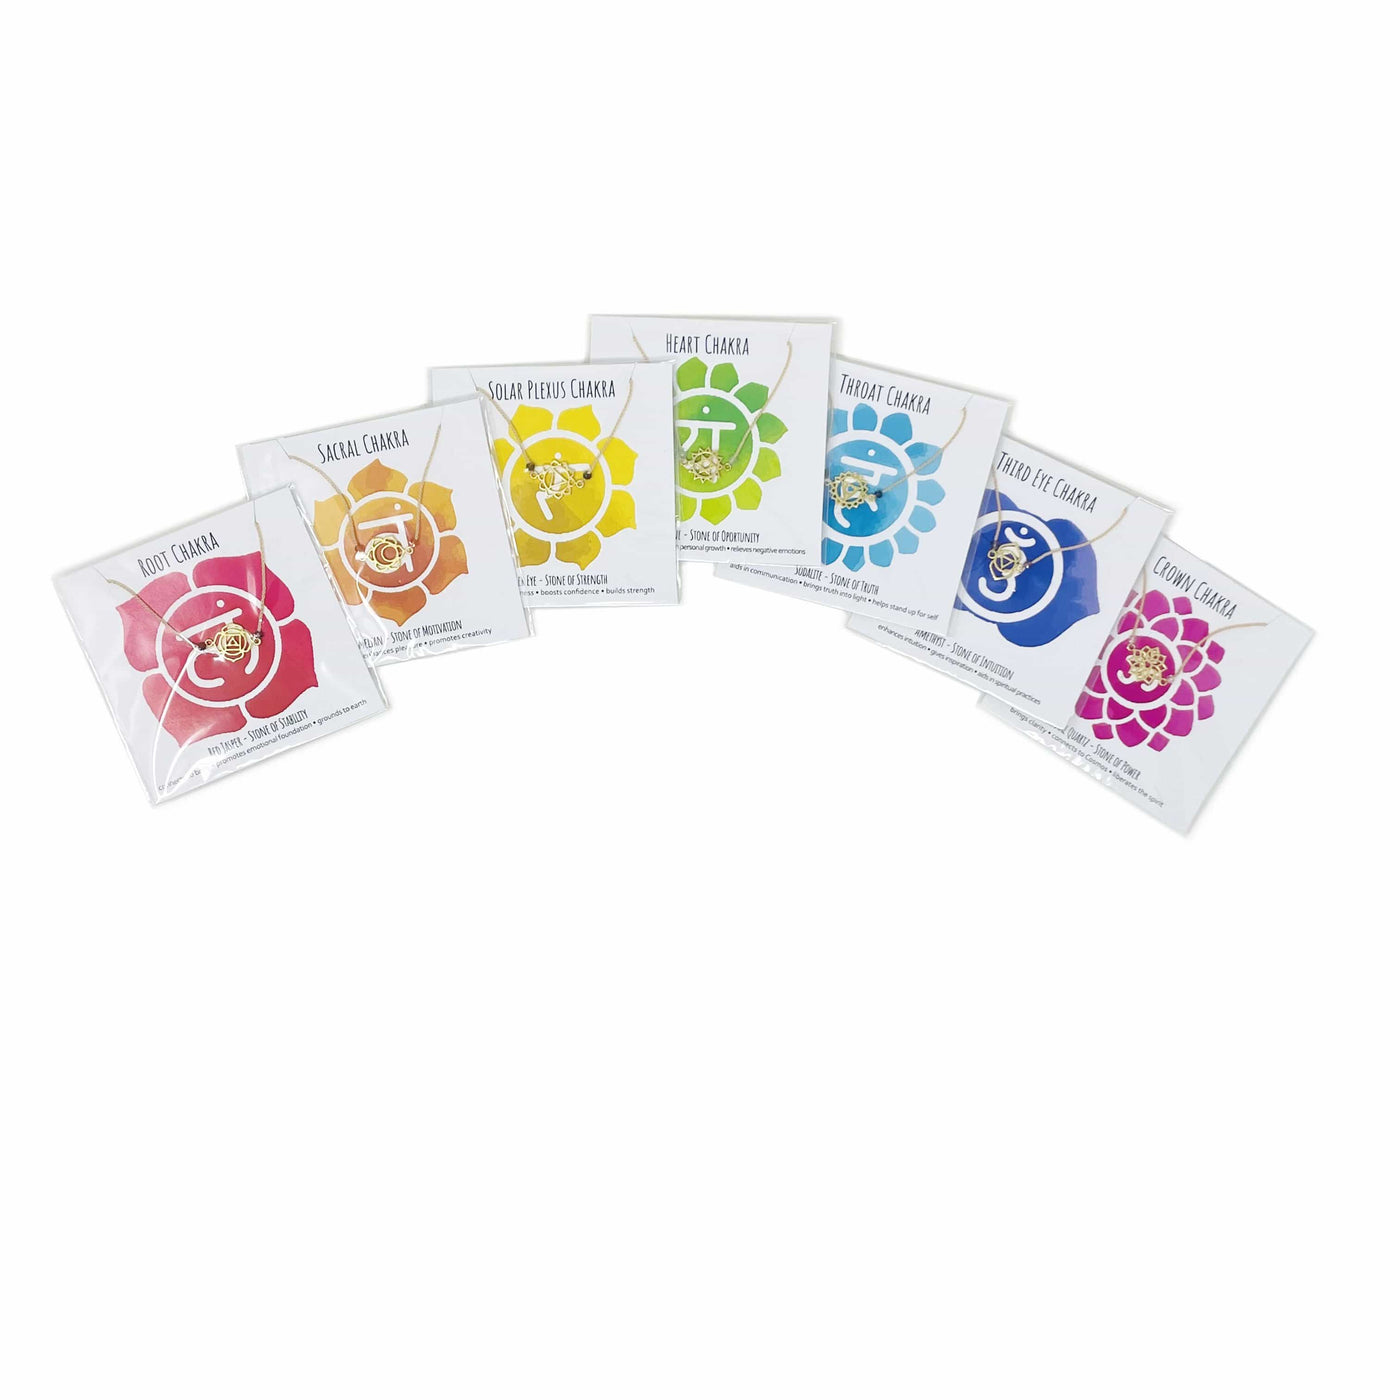 chakra bracelet set in packaging displayed to show the differences on the bracelets 